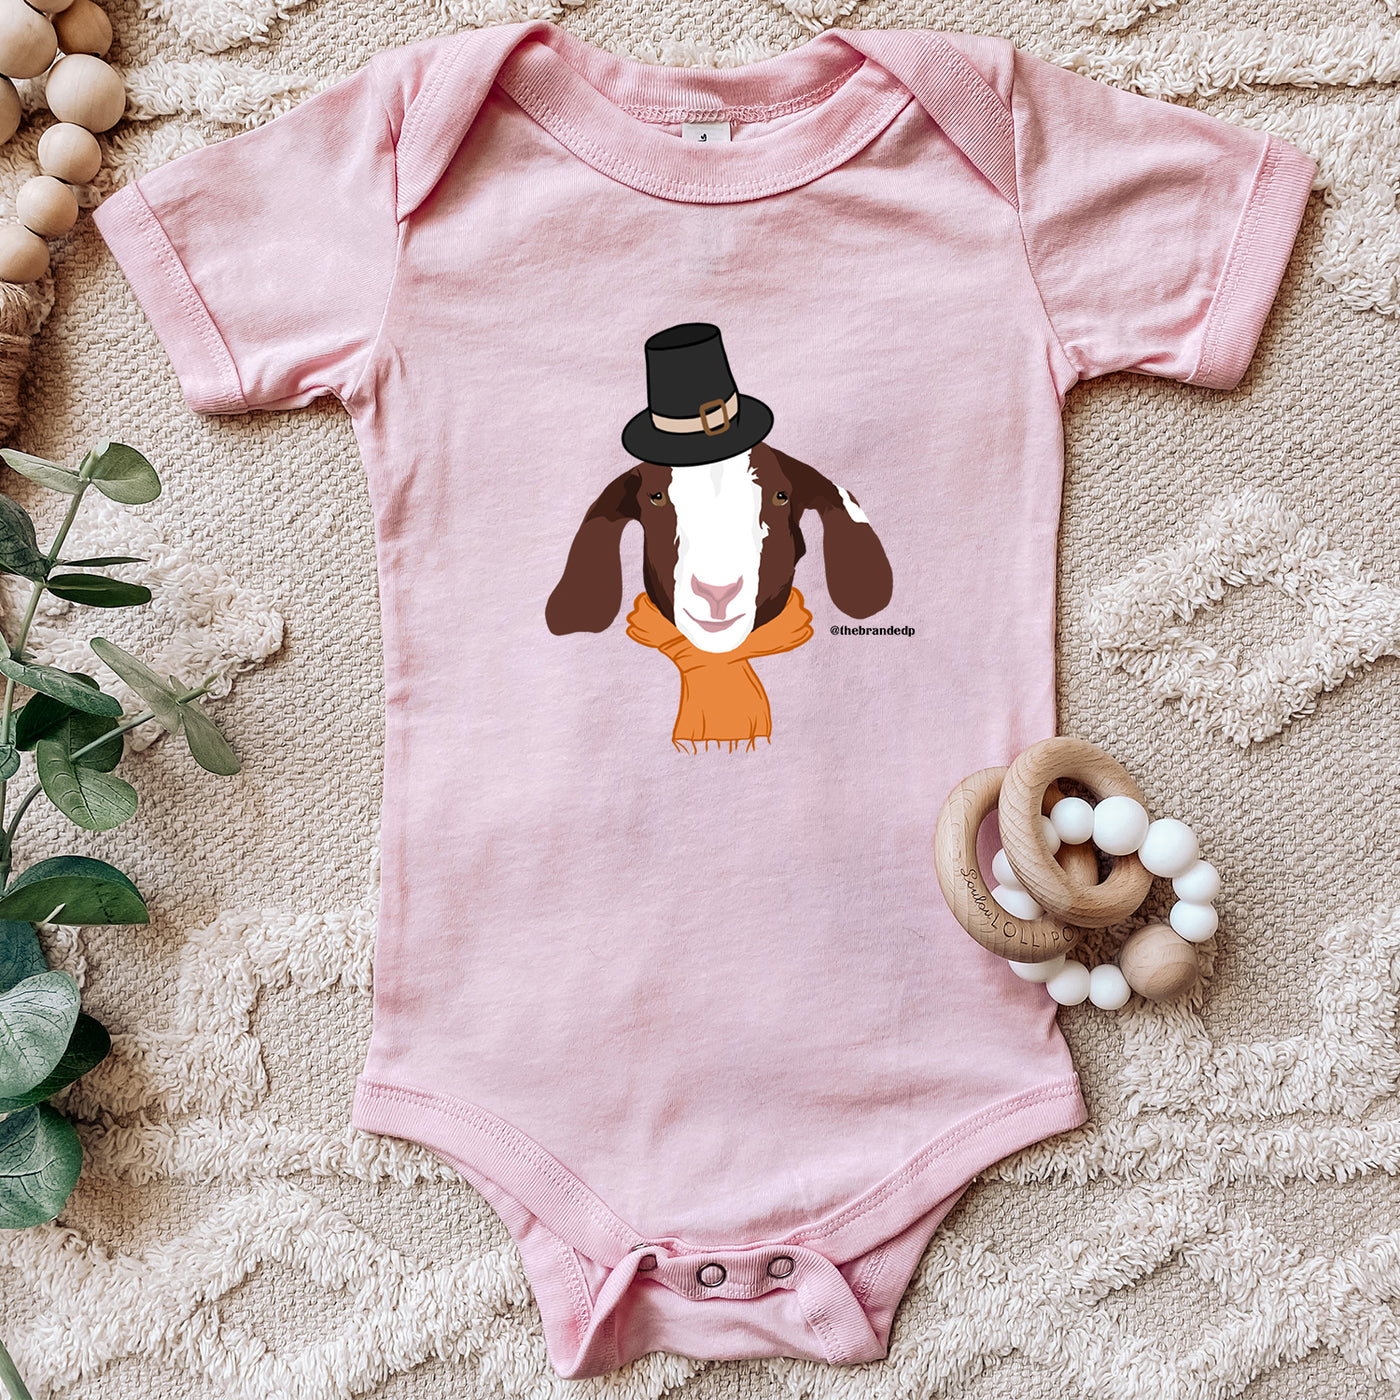 FALL GOAT One Piece/T-Shirt (Newborn - Youth XL) - Multiple Colors!